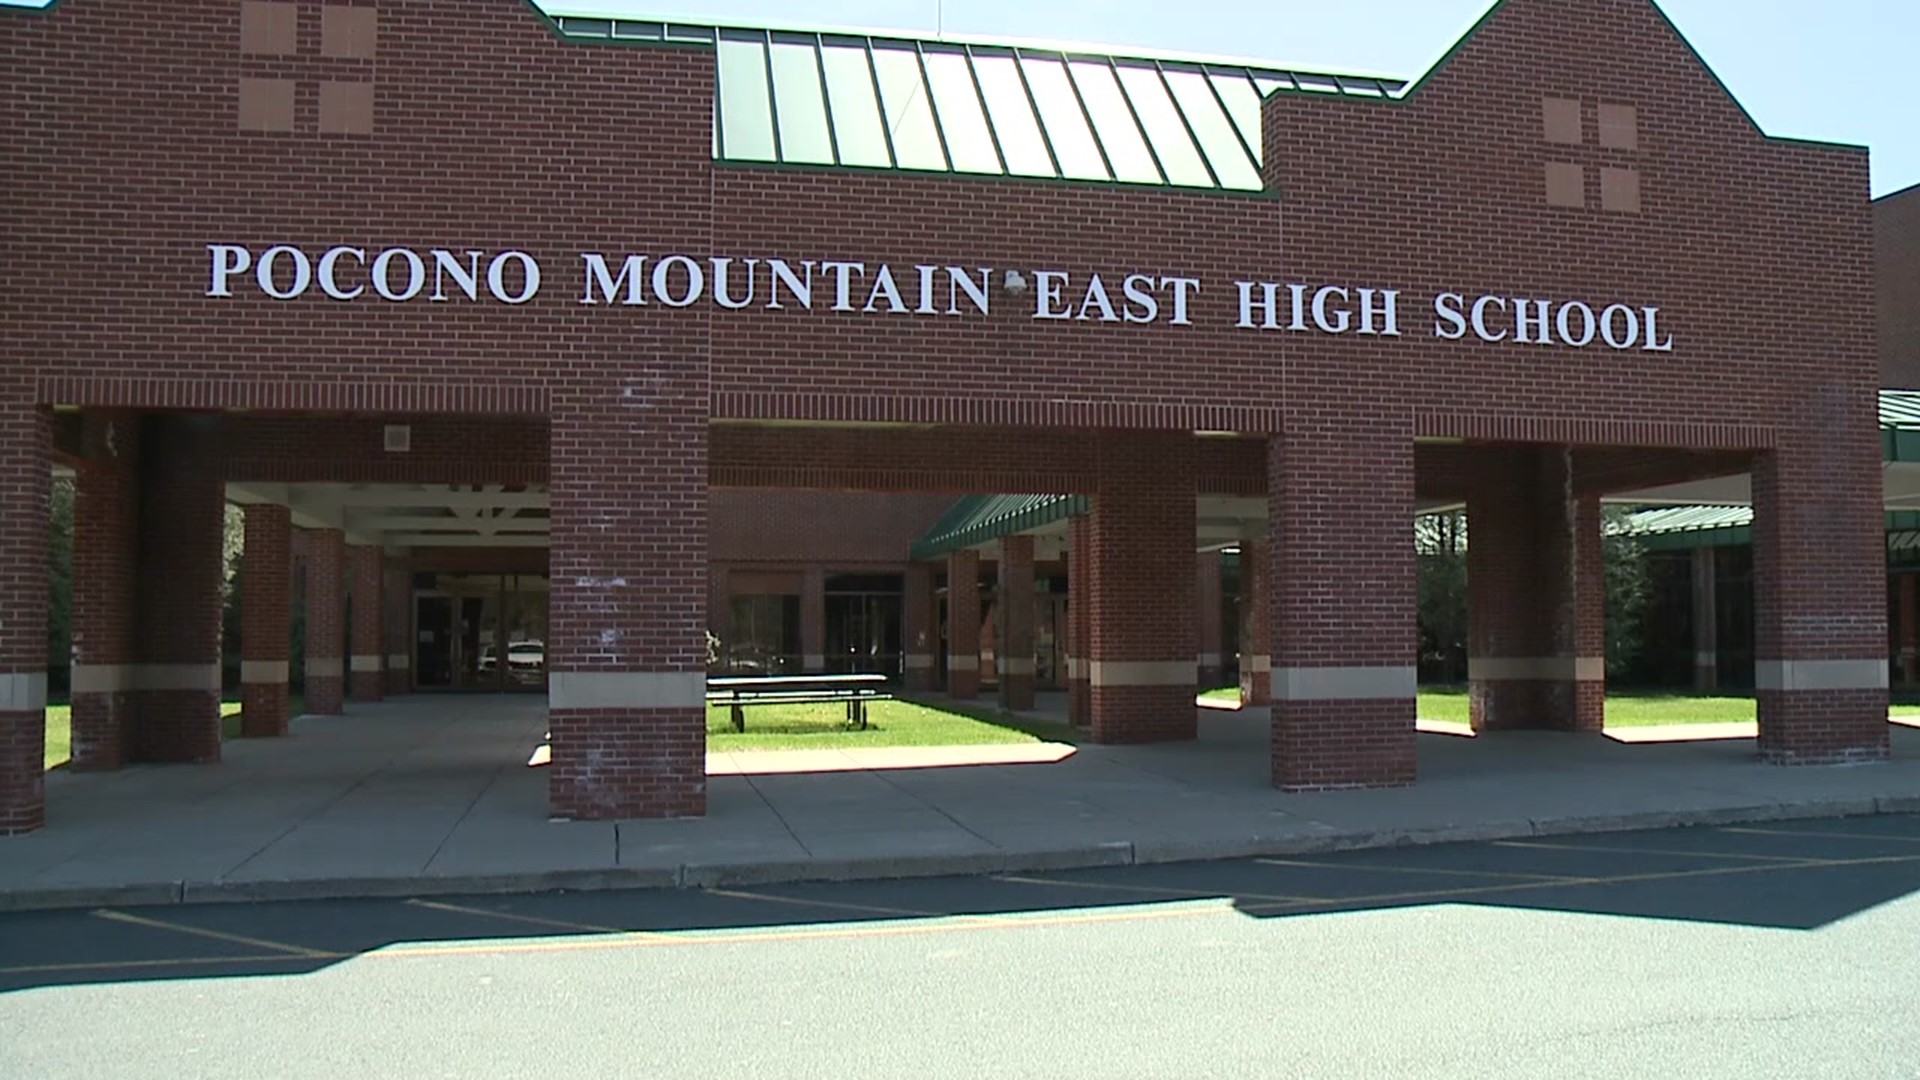 One of the largest school districts in our area has made the decision for kids to return back to school virtually.